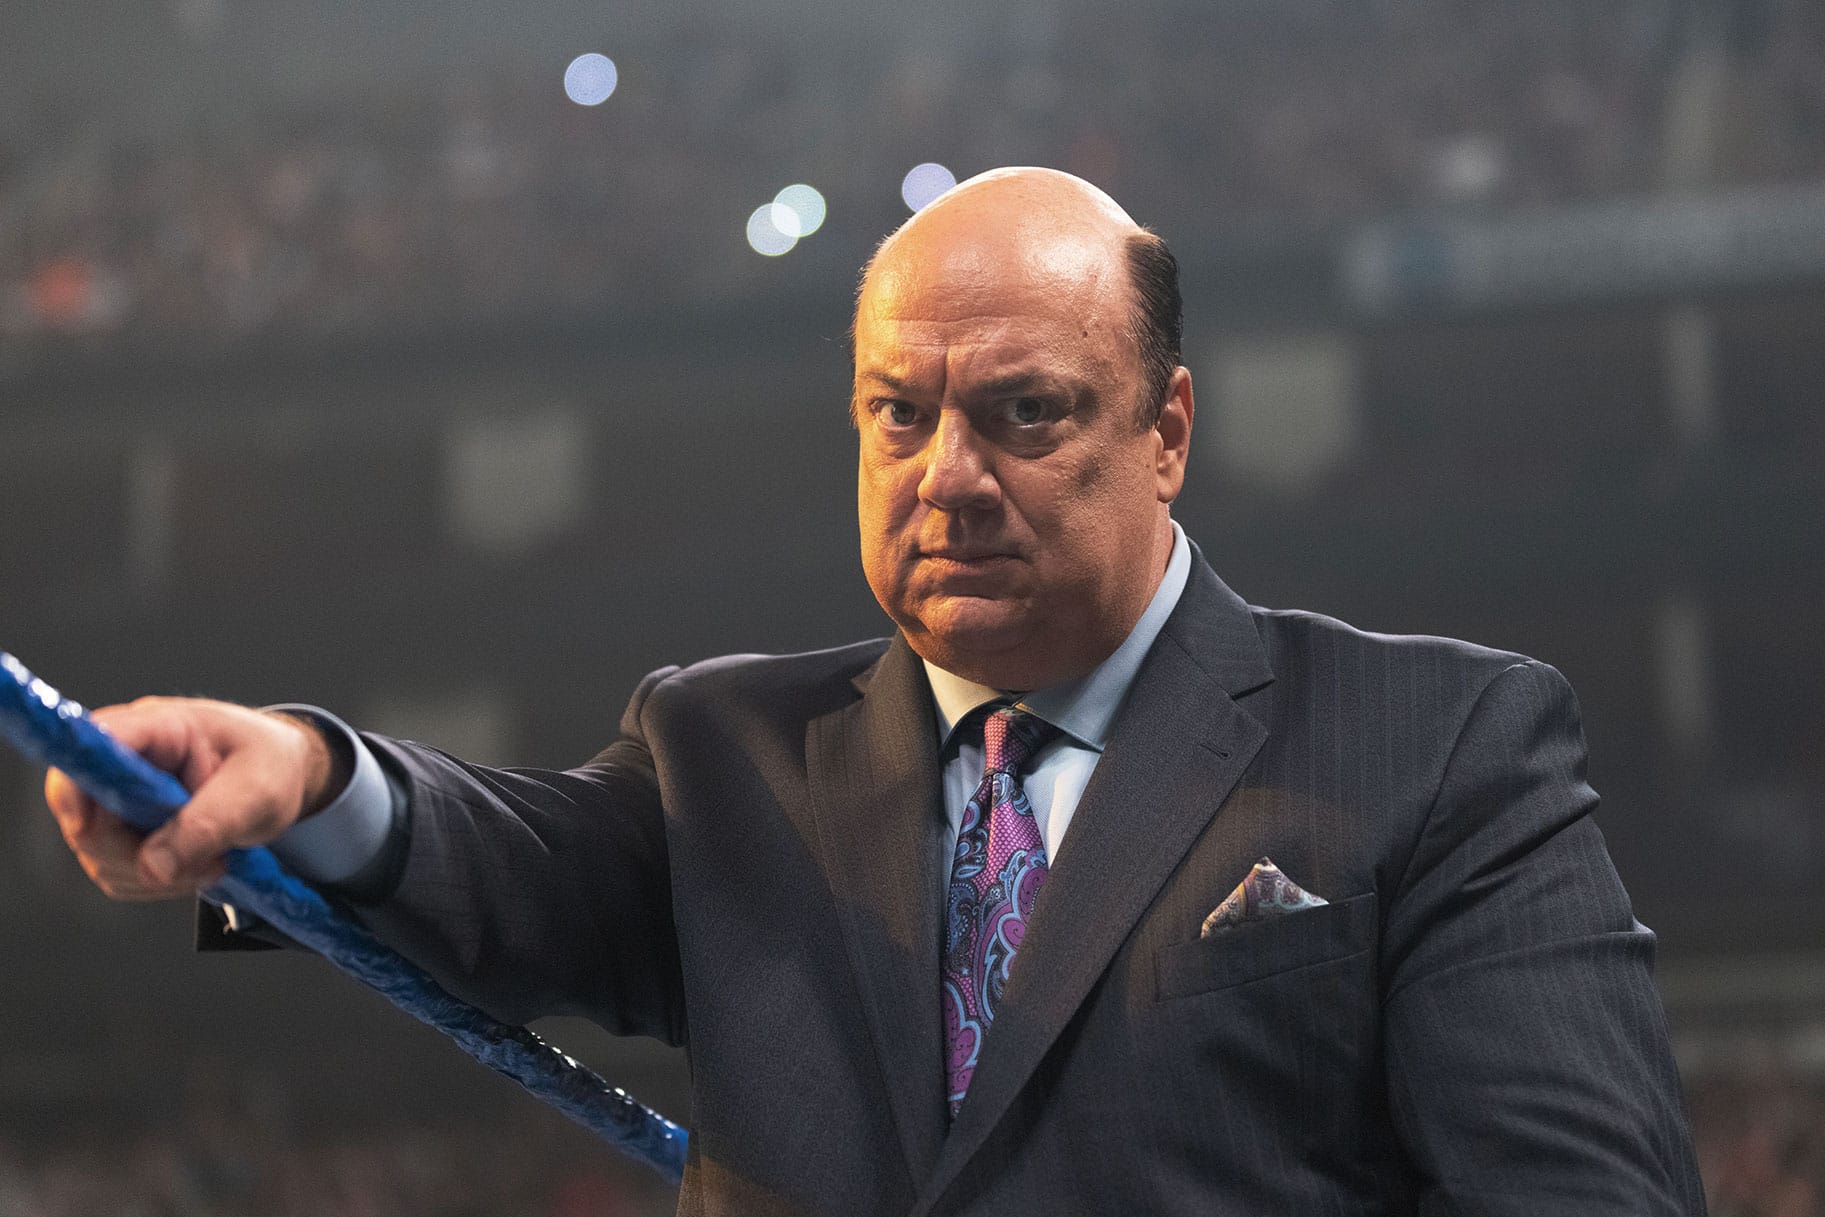 ‘In WWE, Paul Heyman significantly inspired me with his creative ideas,’ reveals Ronda Rousey.